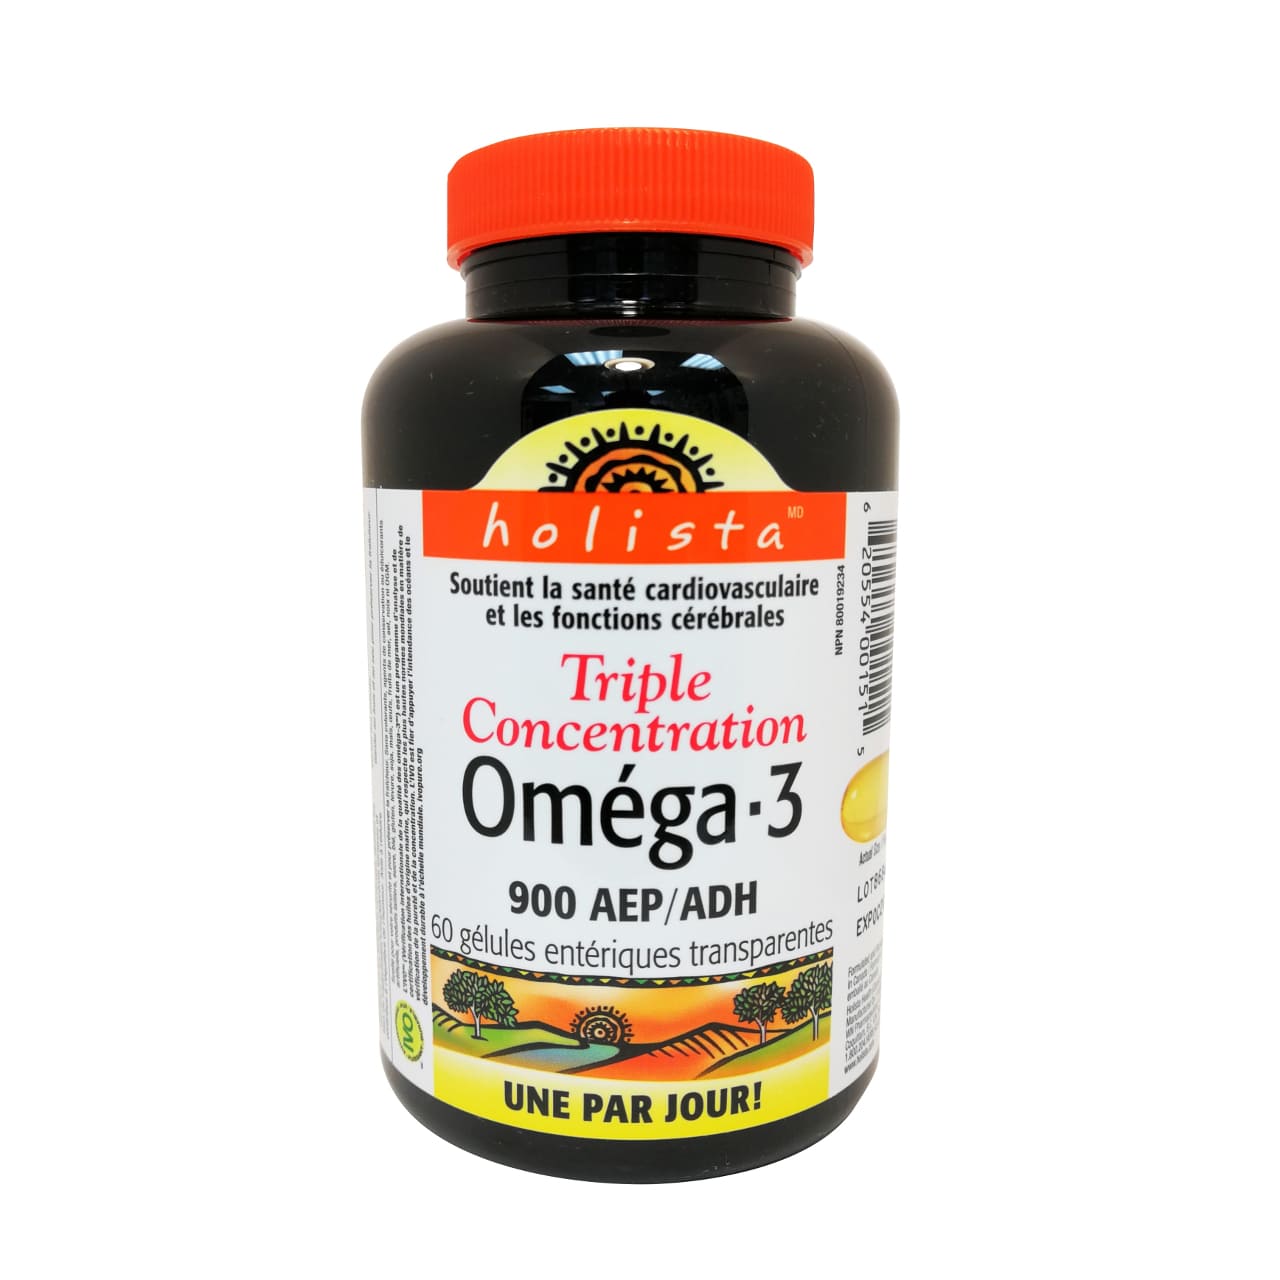 Product label for Holista Omega-3 Triple Strength 900 EPA/DHA in French